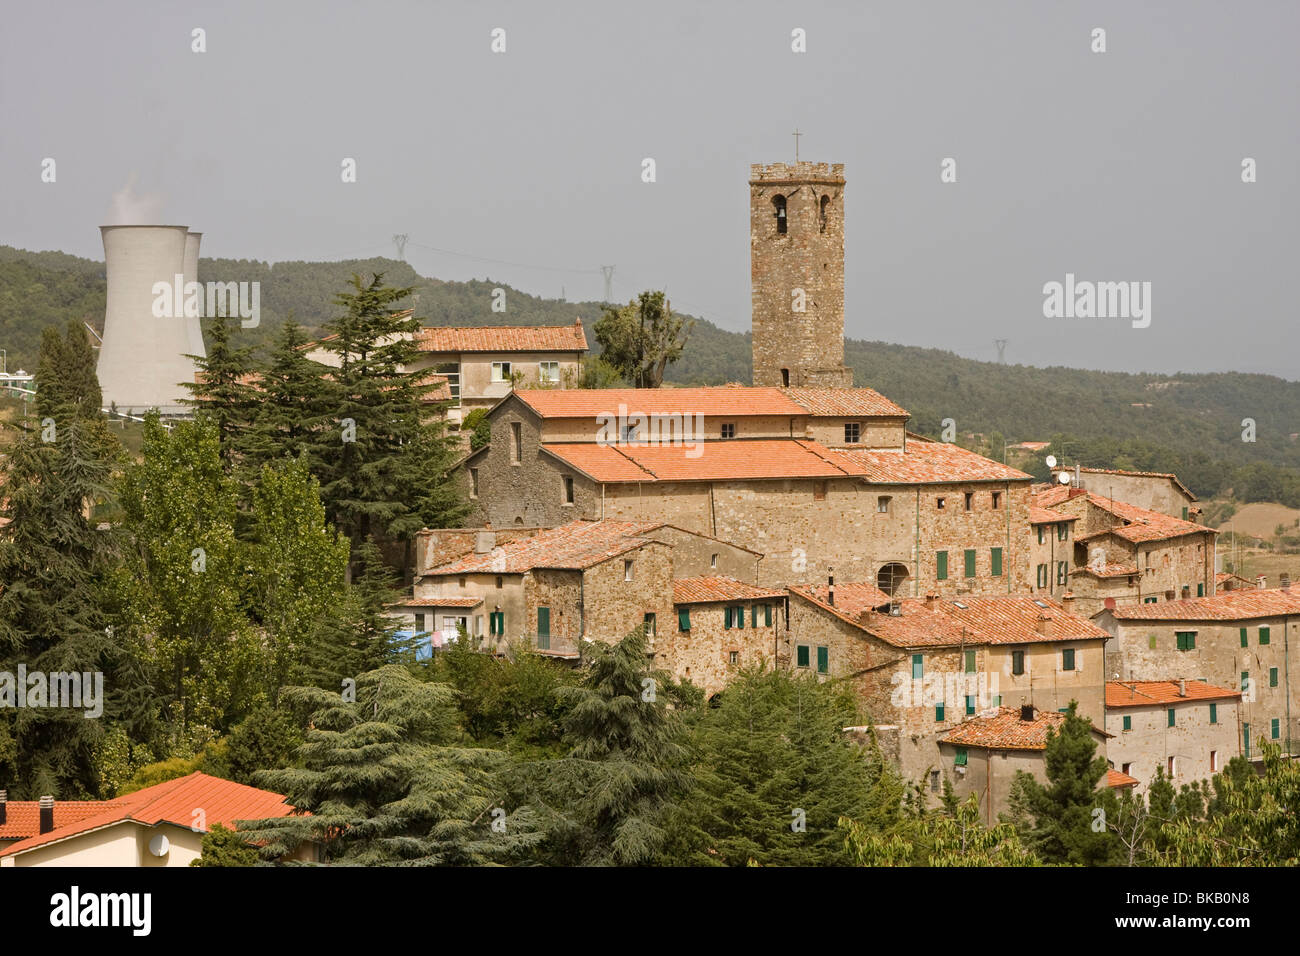 Castelnuovo with cooling tower, Italy Stock Photo